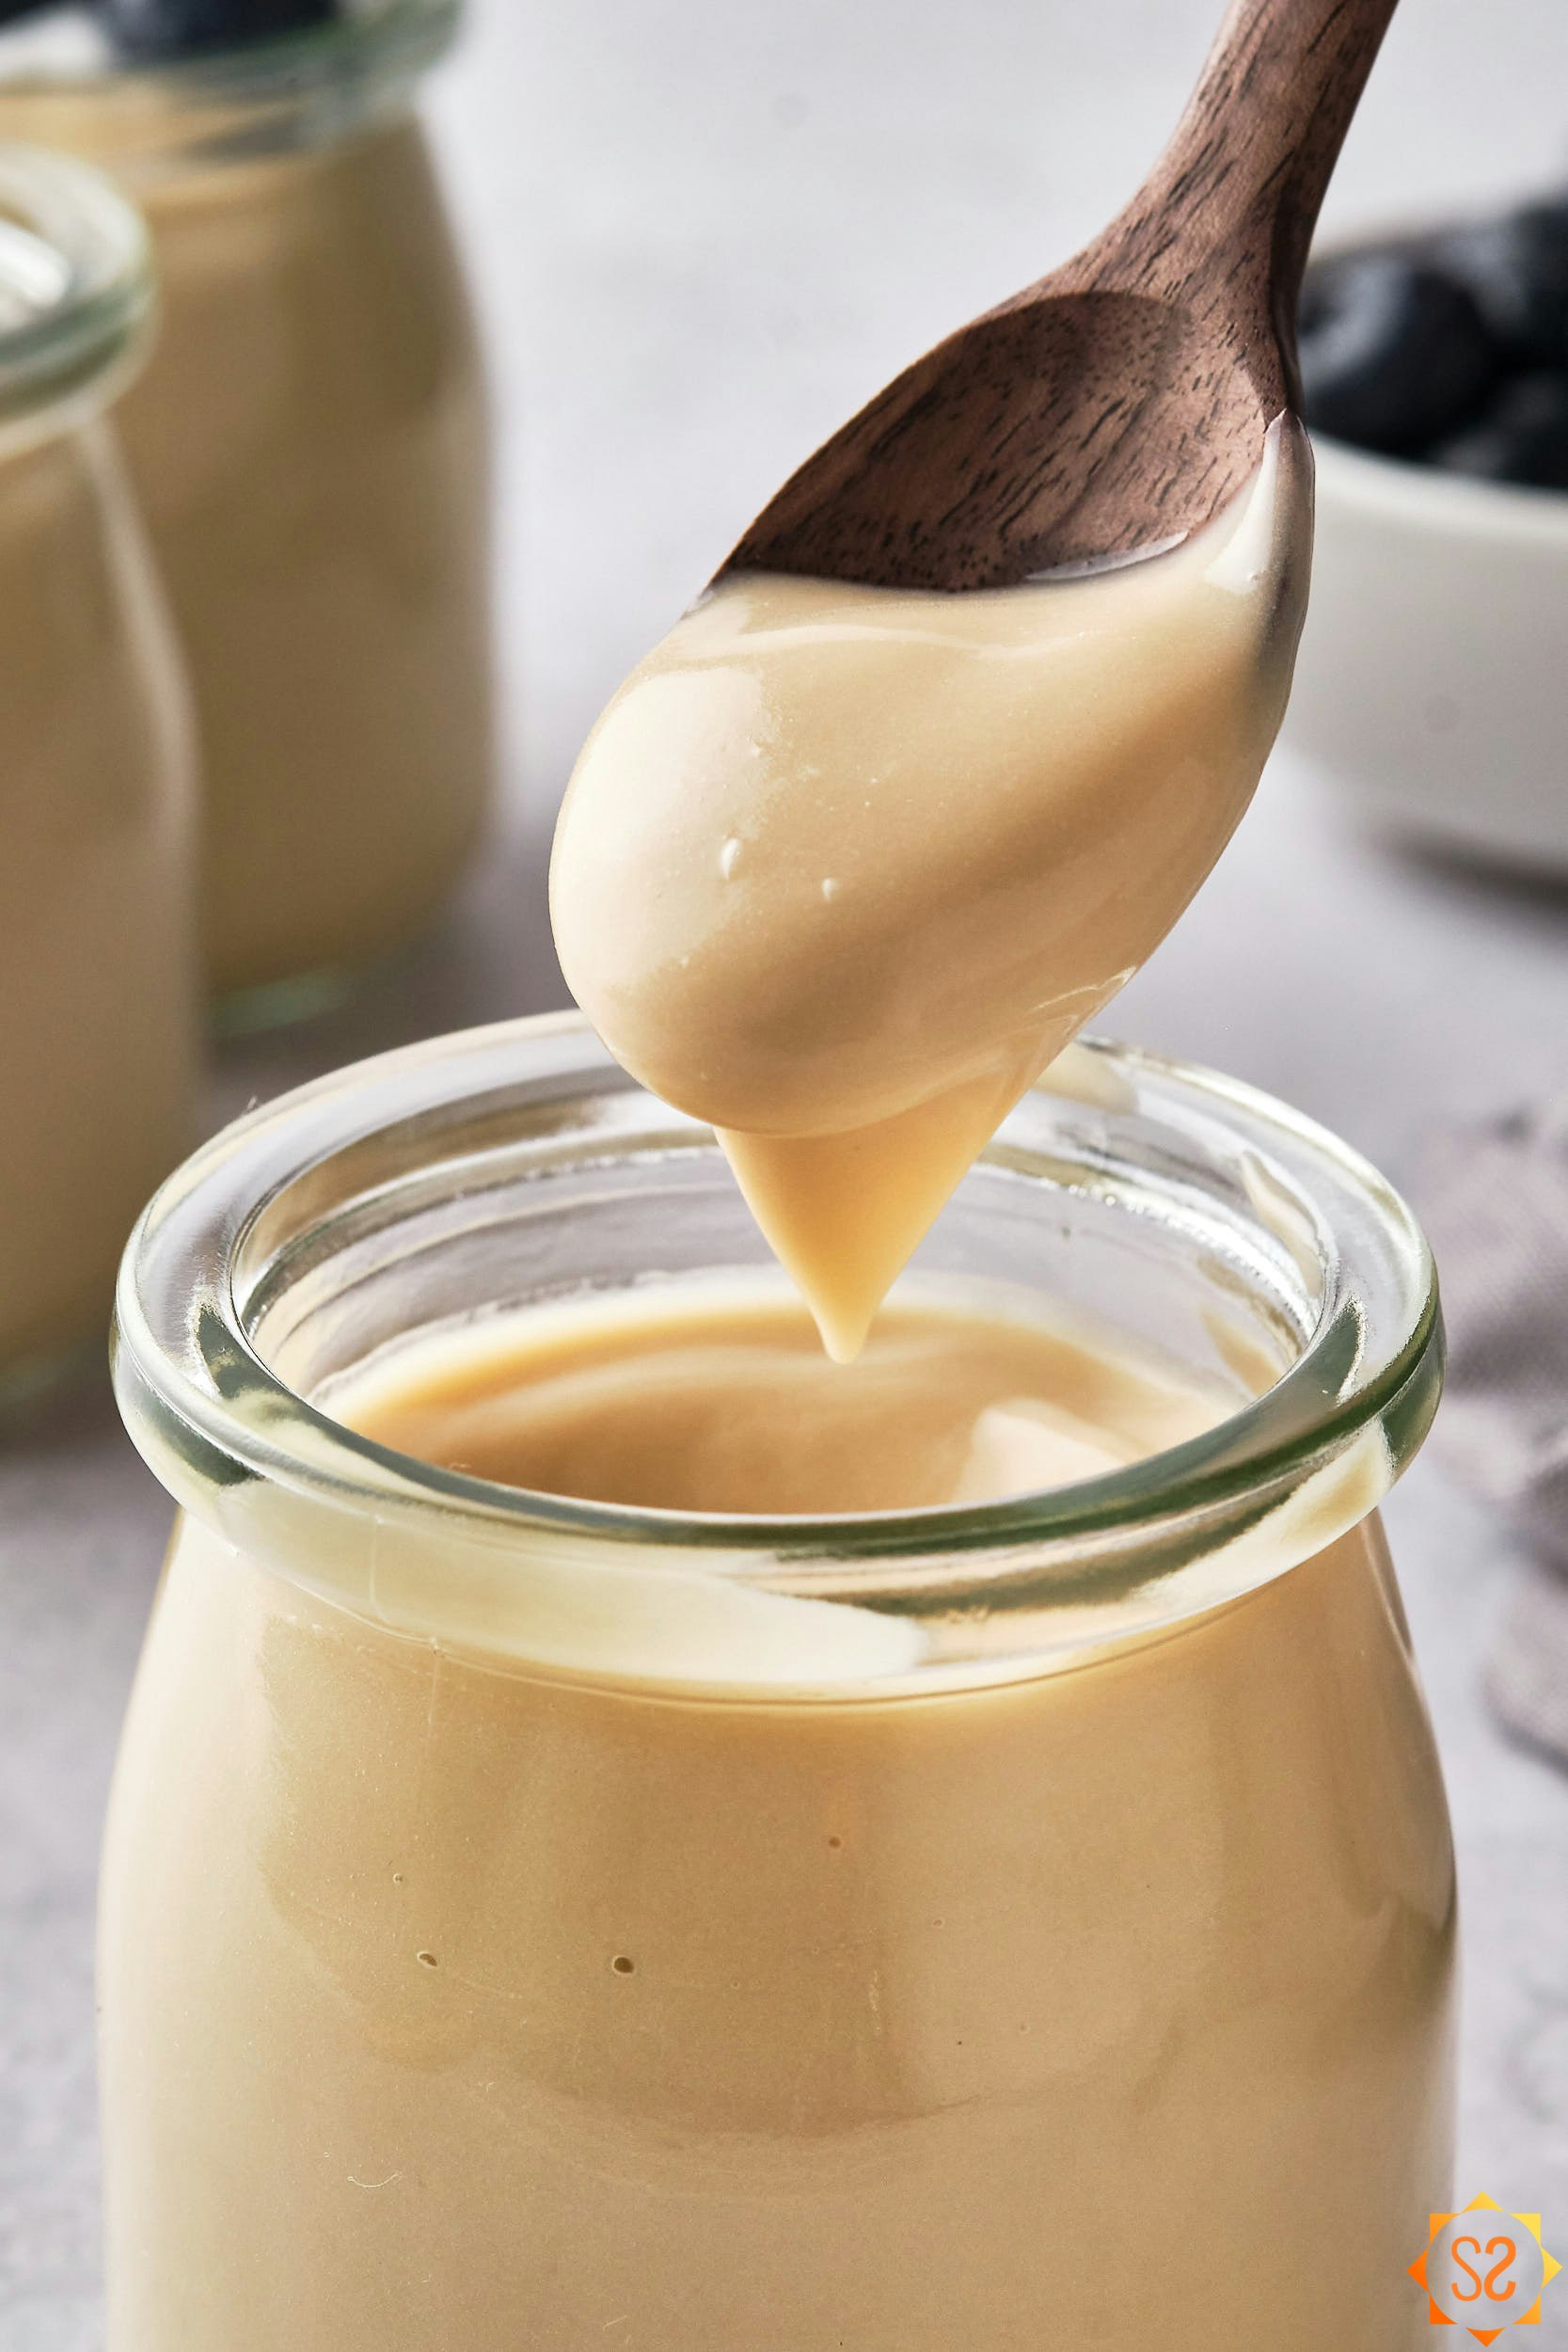 Vegan vanilla pudding being spooned out of a jar.